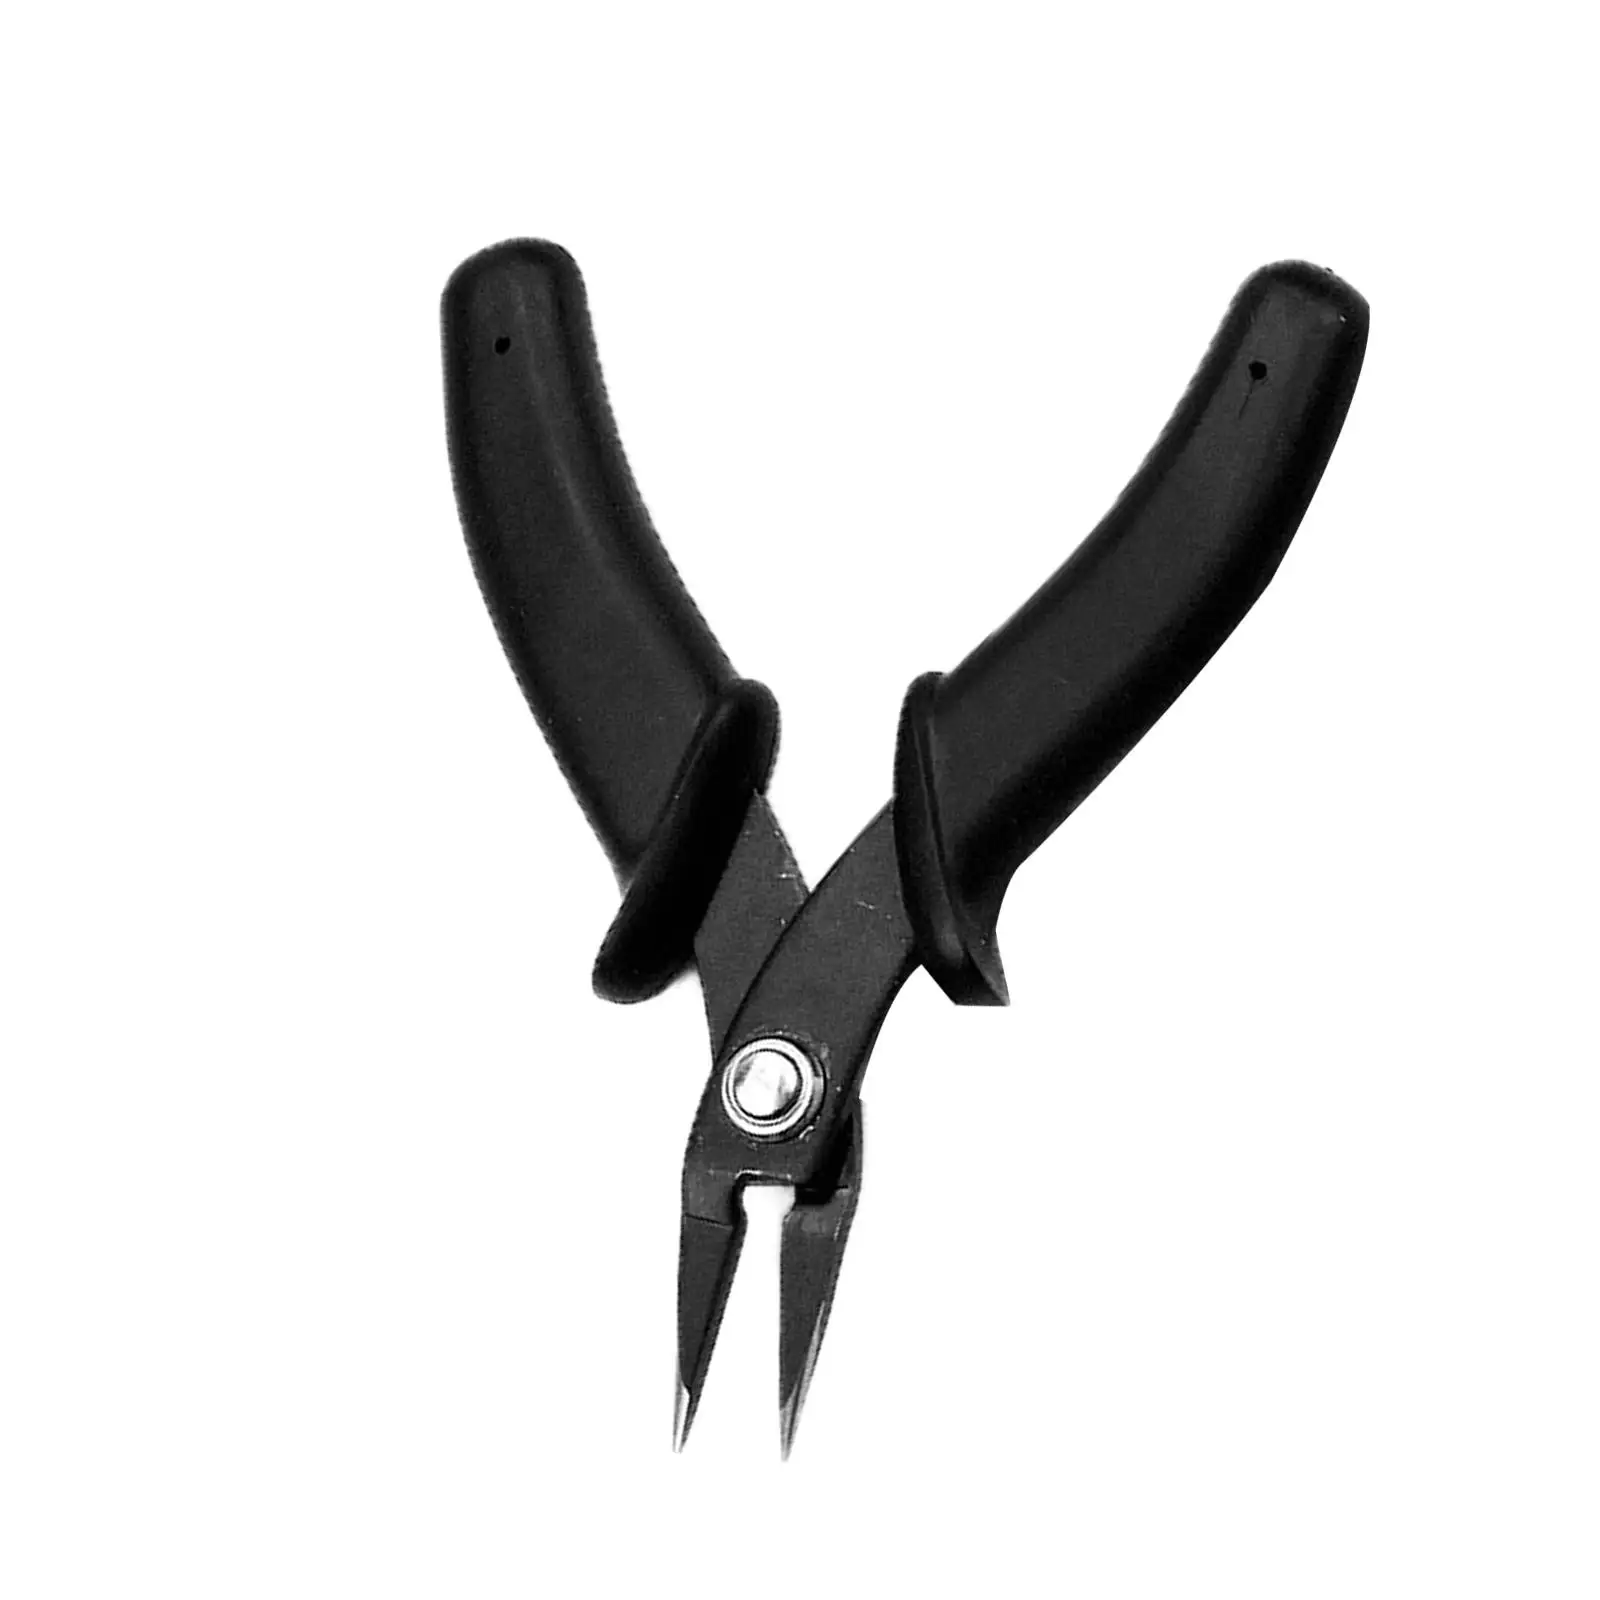 Heavy Duty Side Cutting Long Nose Plier for Jewelry Makers and Craft Lovers